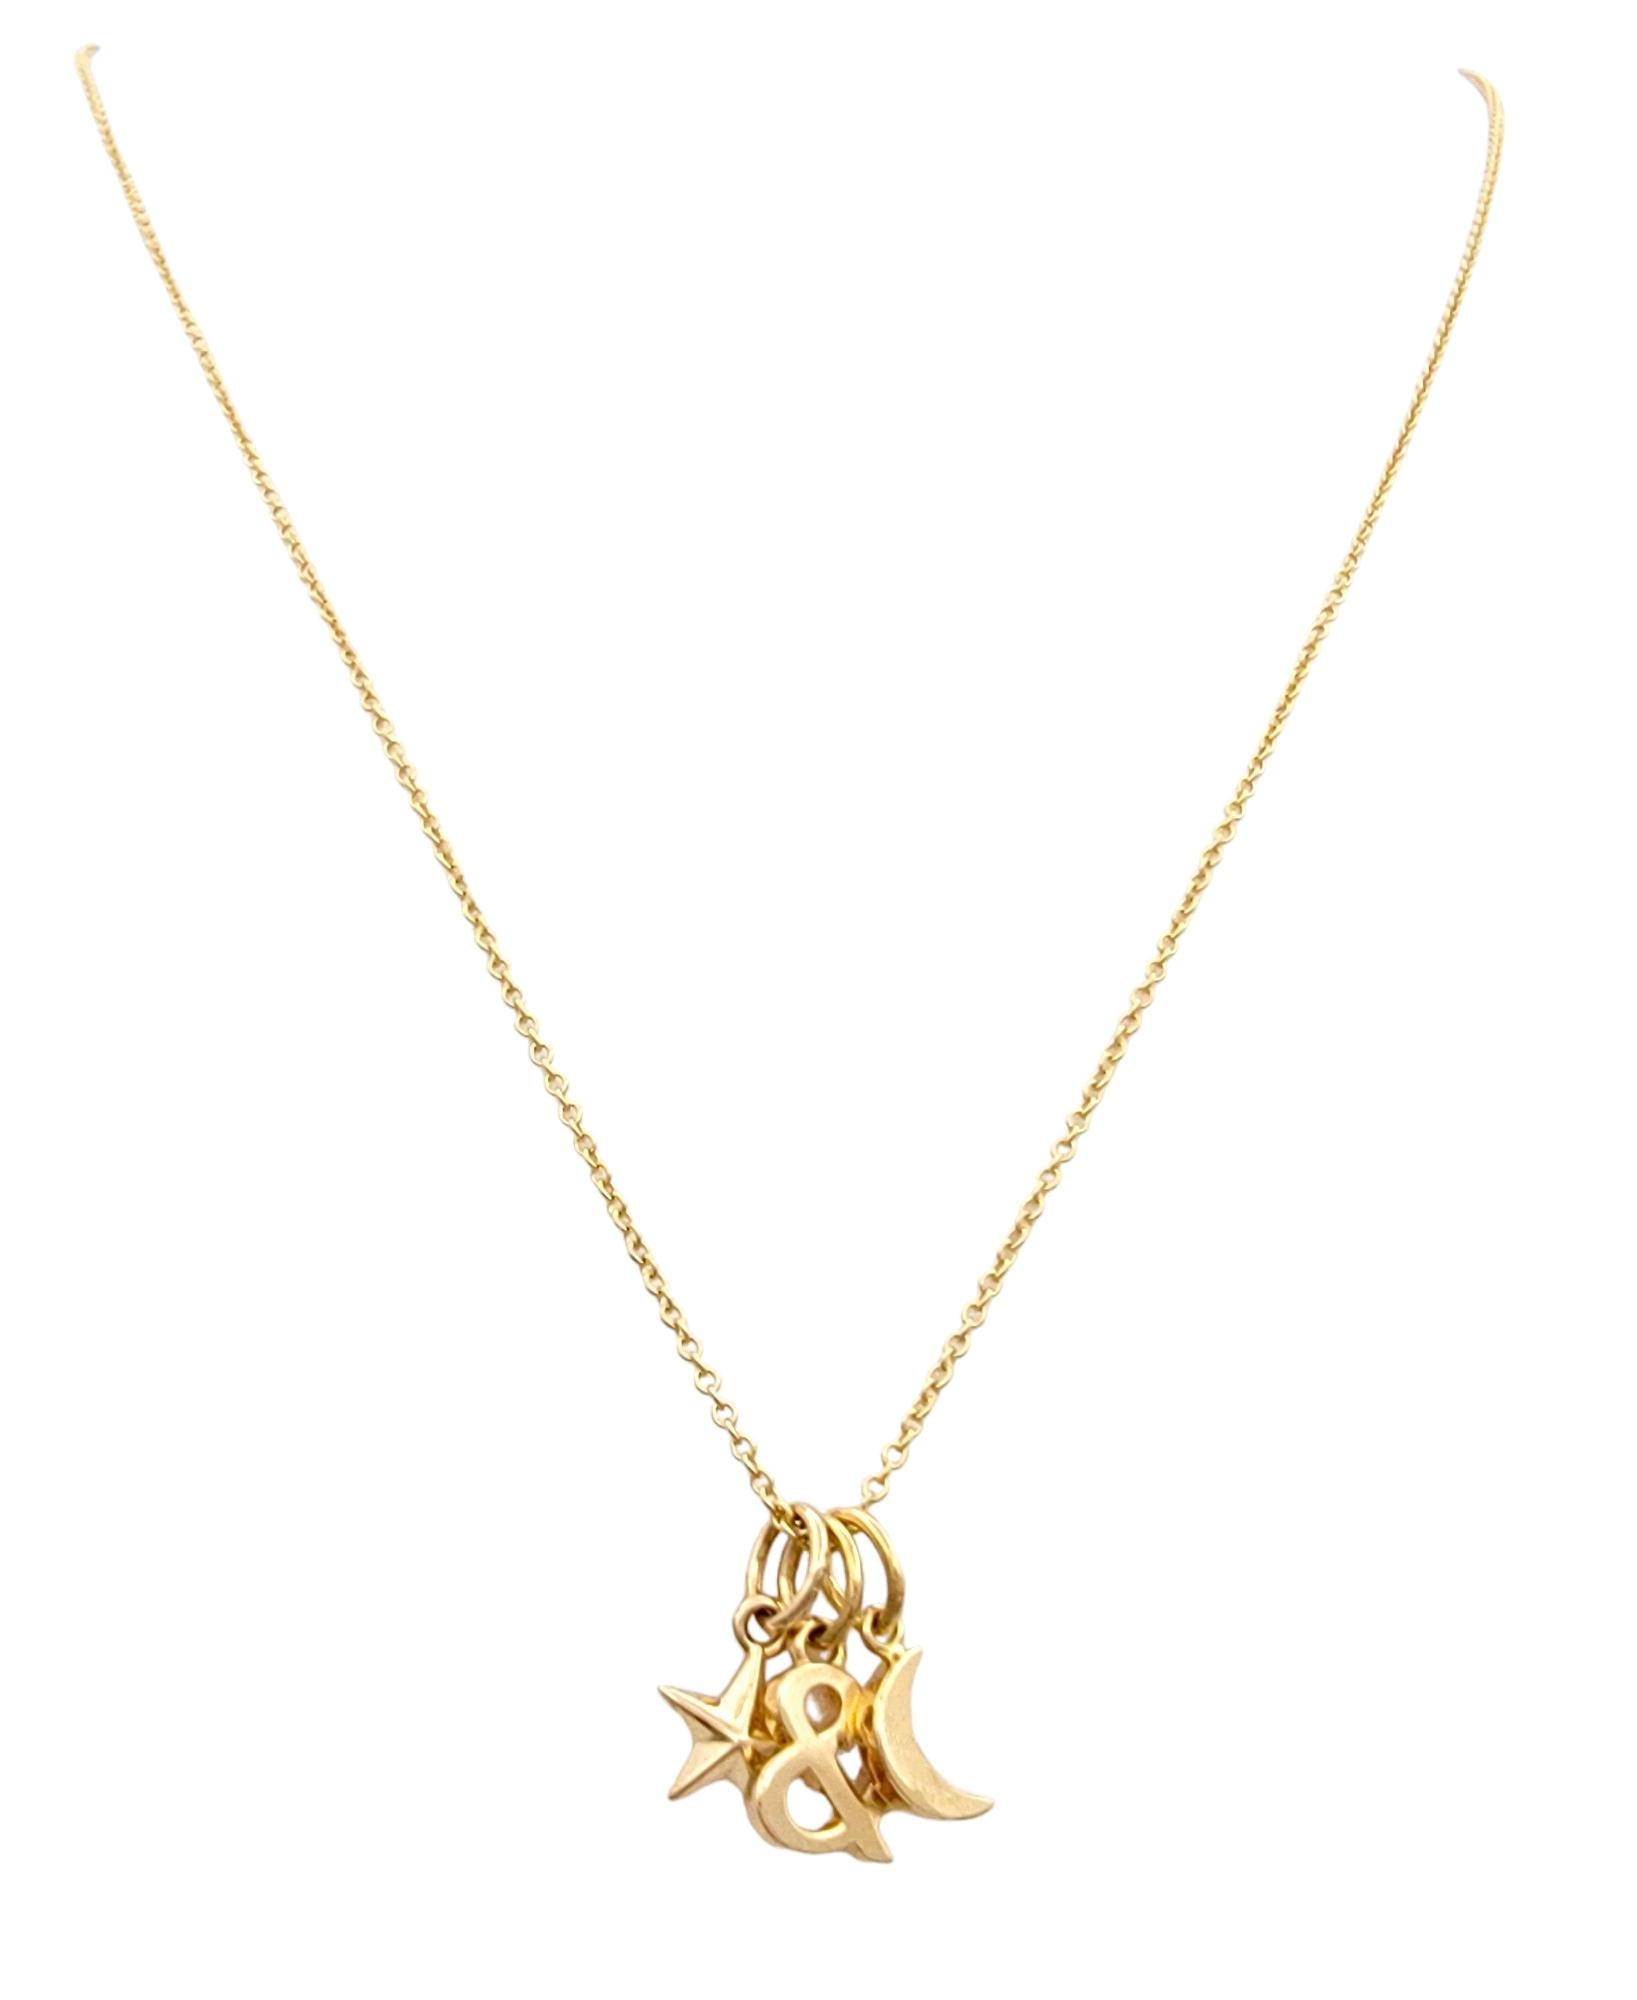 This beautiful Tiffany & Co. charm necklace in 18 karat rose gold is a delicate and whimsical piece that captures the magic of the night sky. Suspended from a dainty cable chain, the necklace features three charming pendants: a star, a moon, and an